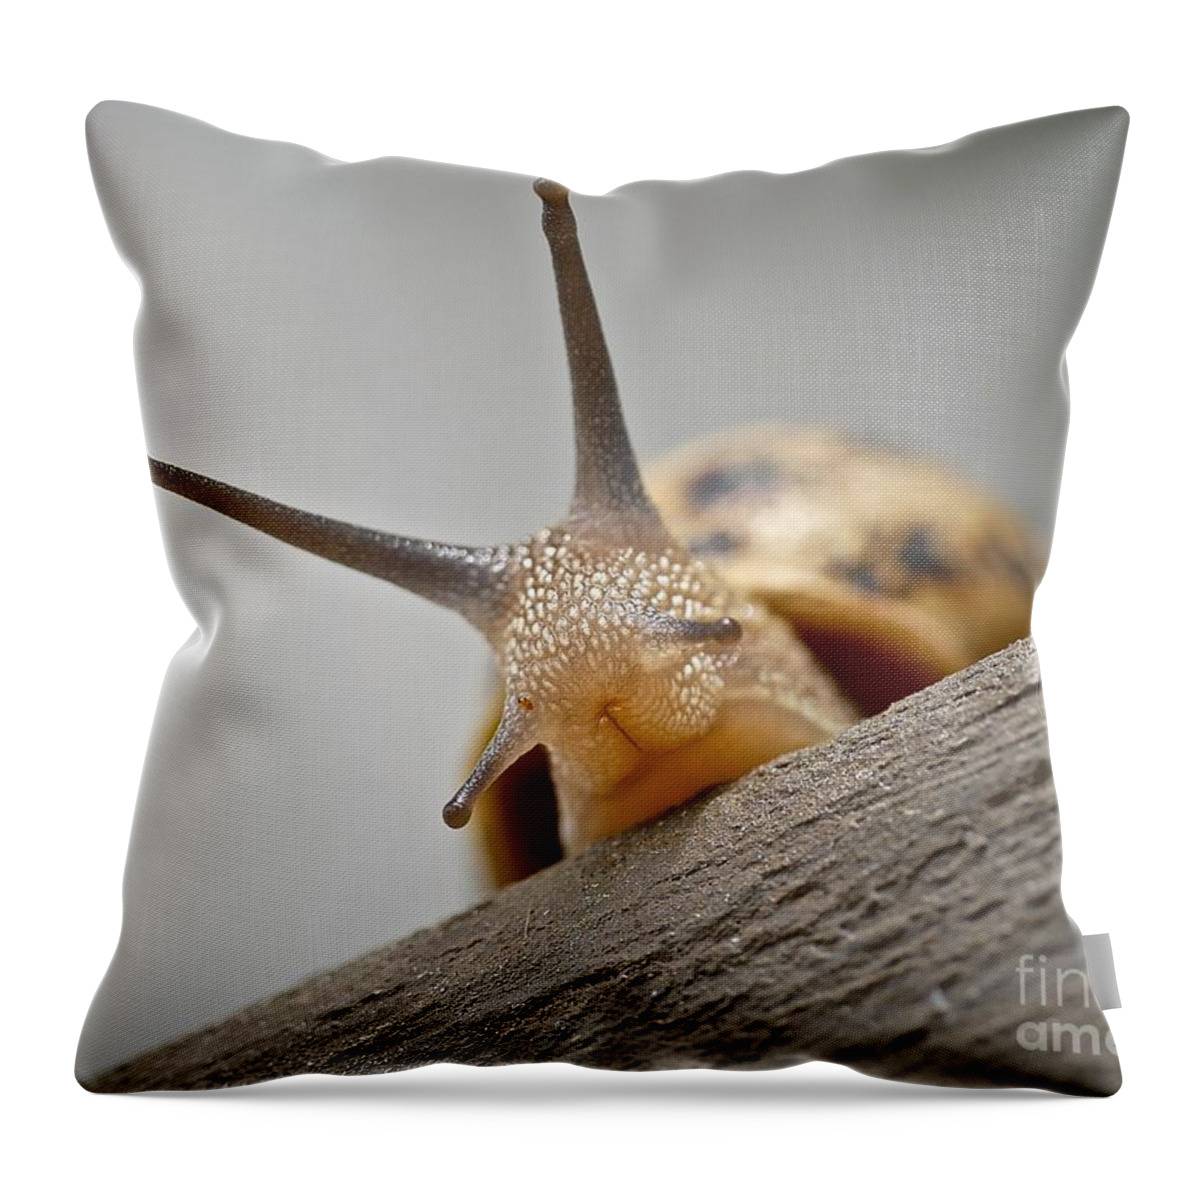 Slug Throw Pillow featuring the photograph Hello There by Elisabeth Derichs